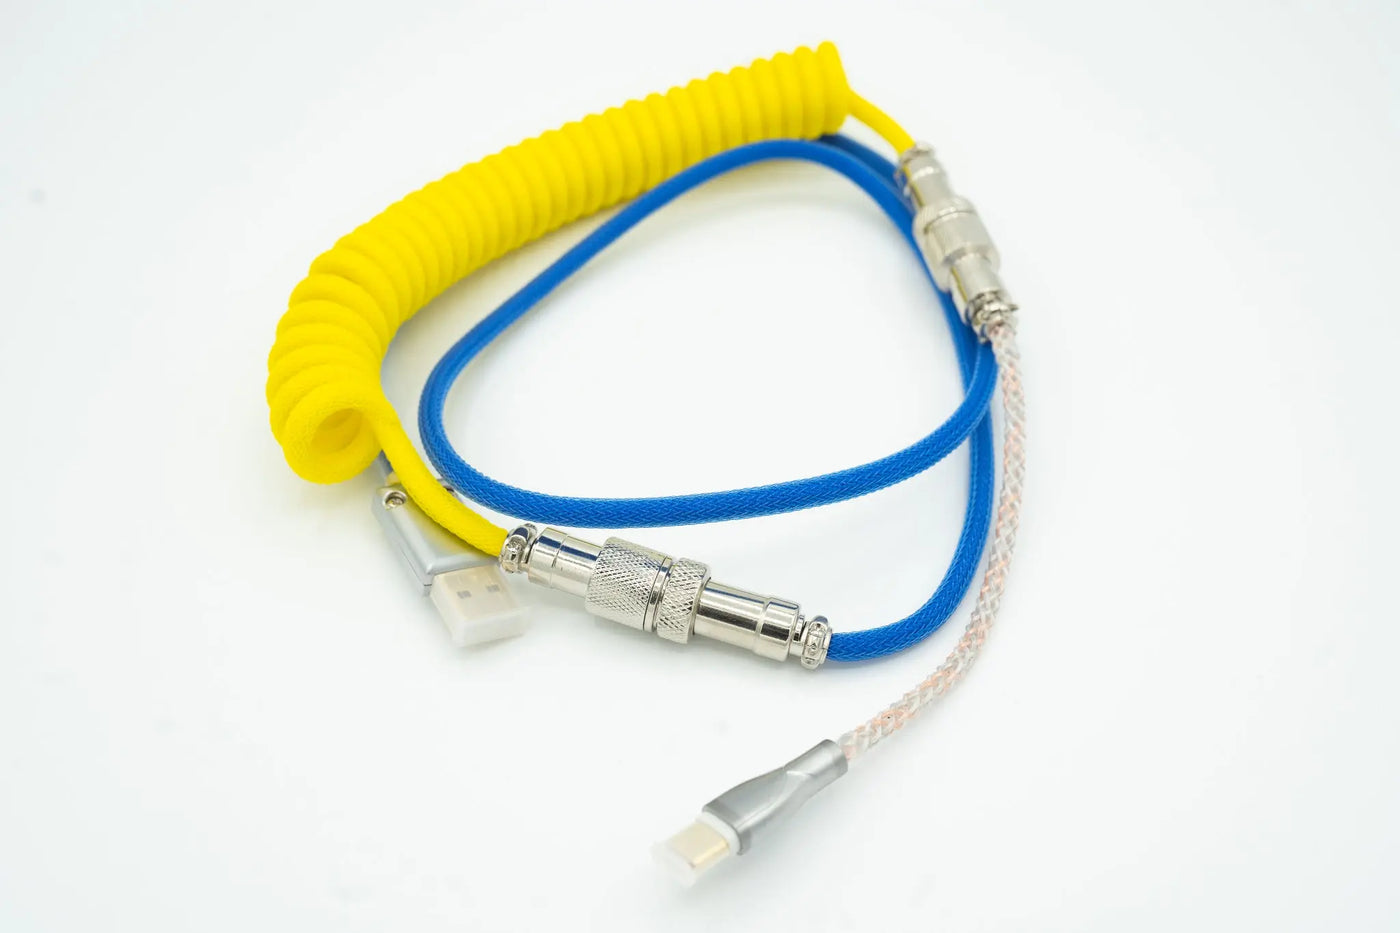 Blue and Yellow Light up Custom Coiled Type C USB Cable for Keyboard Vyral